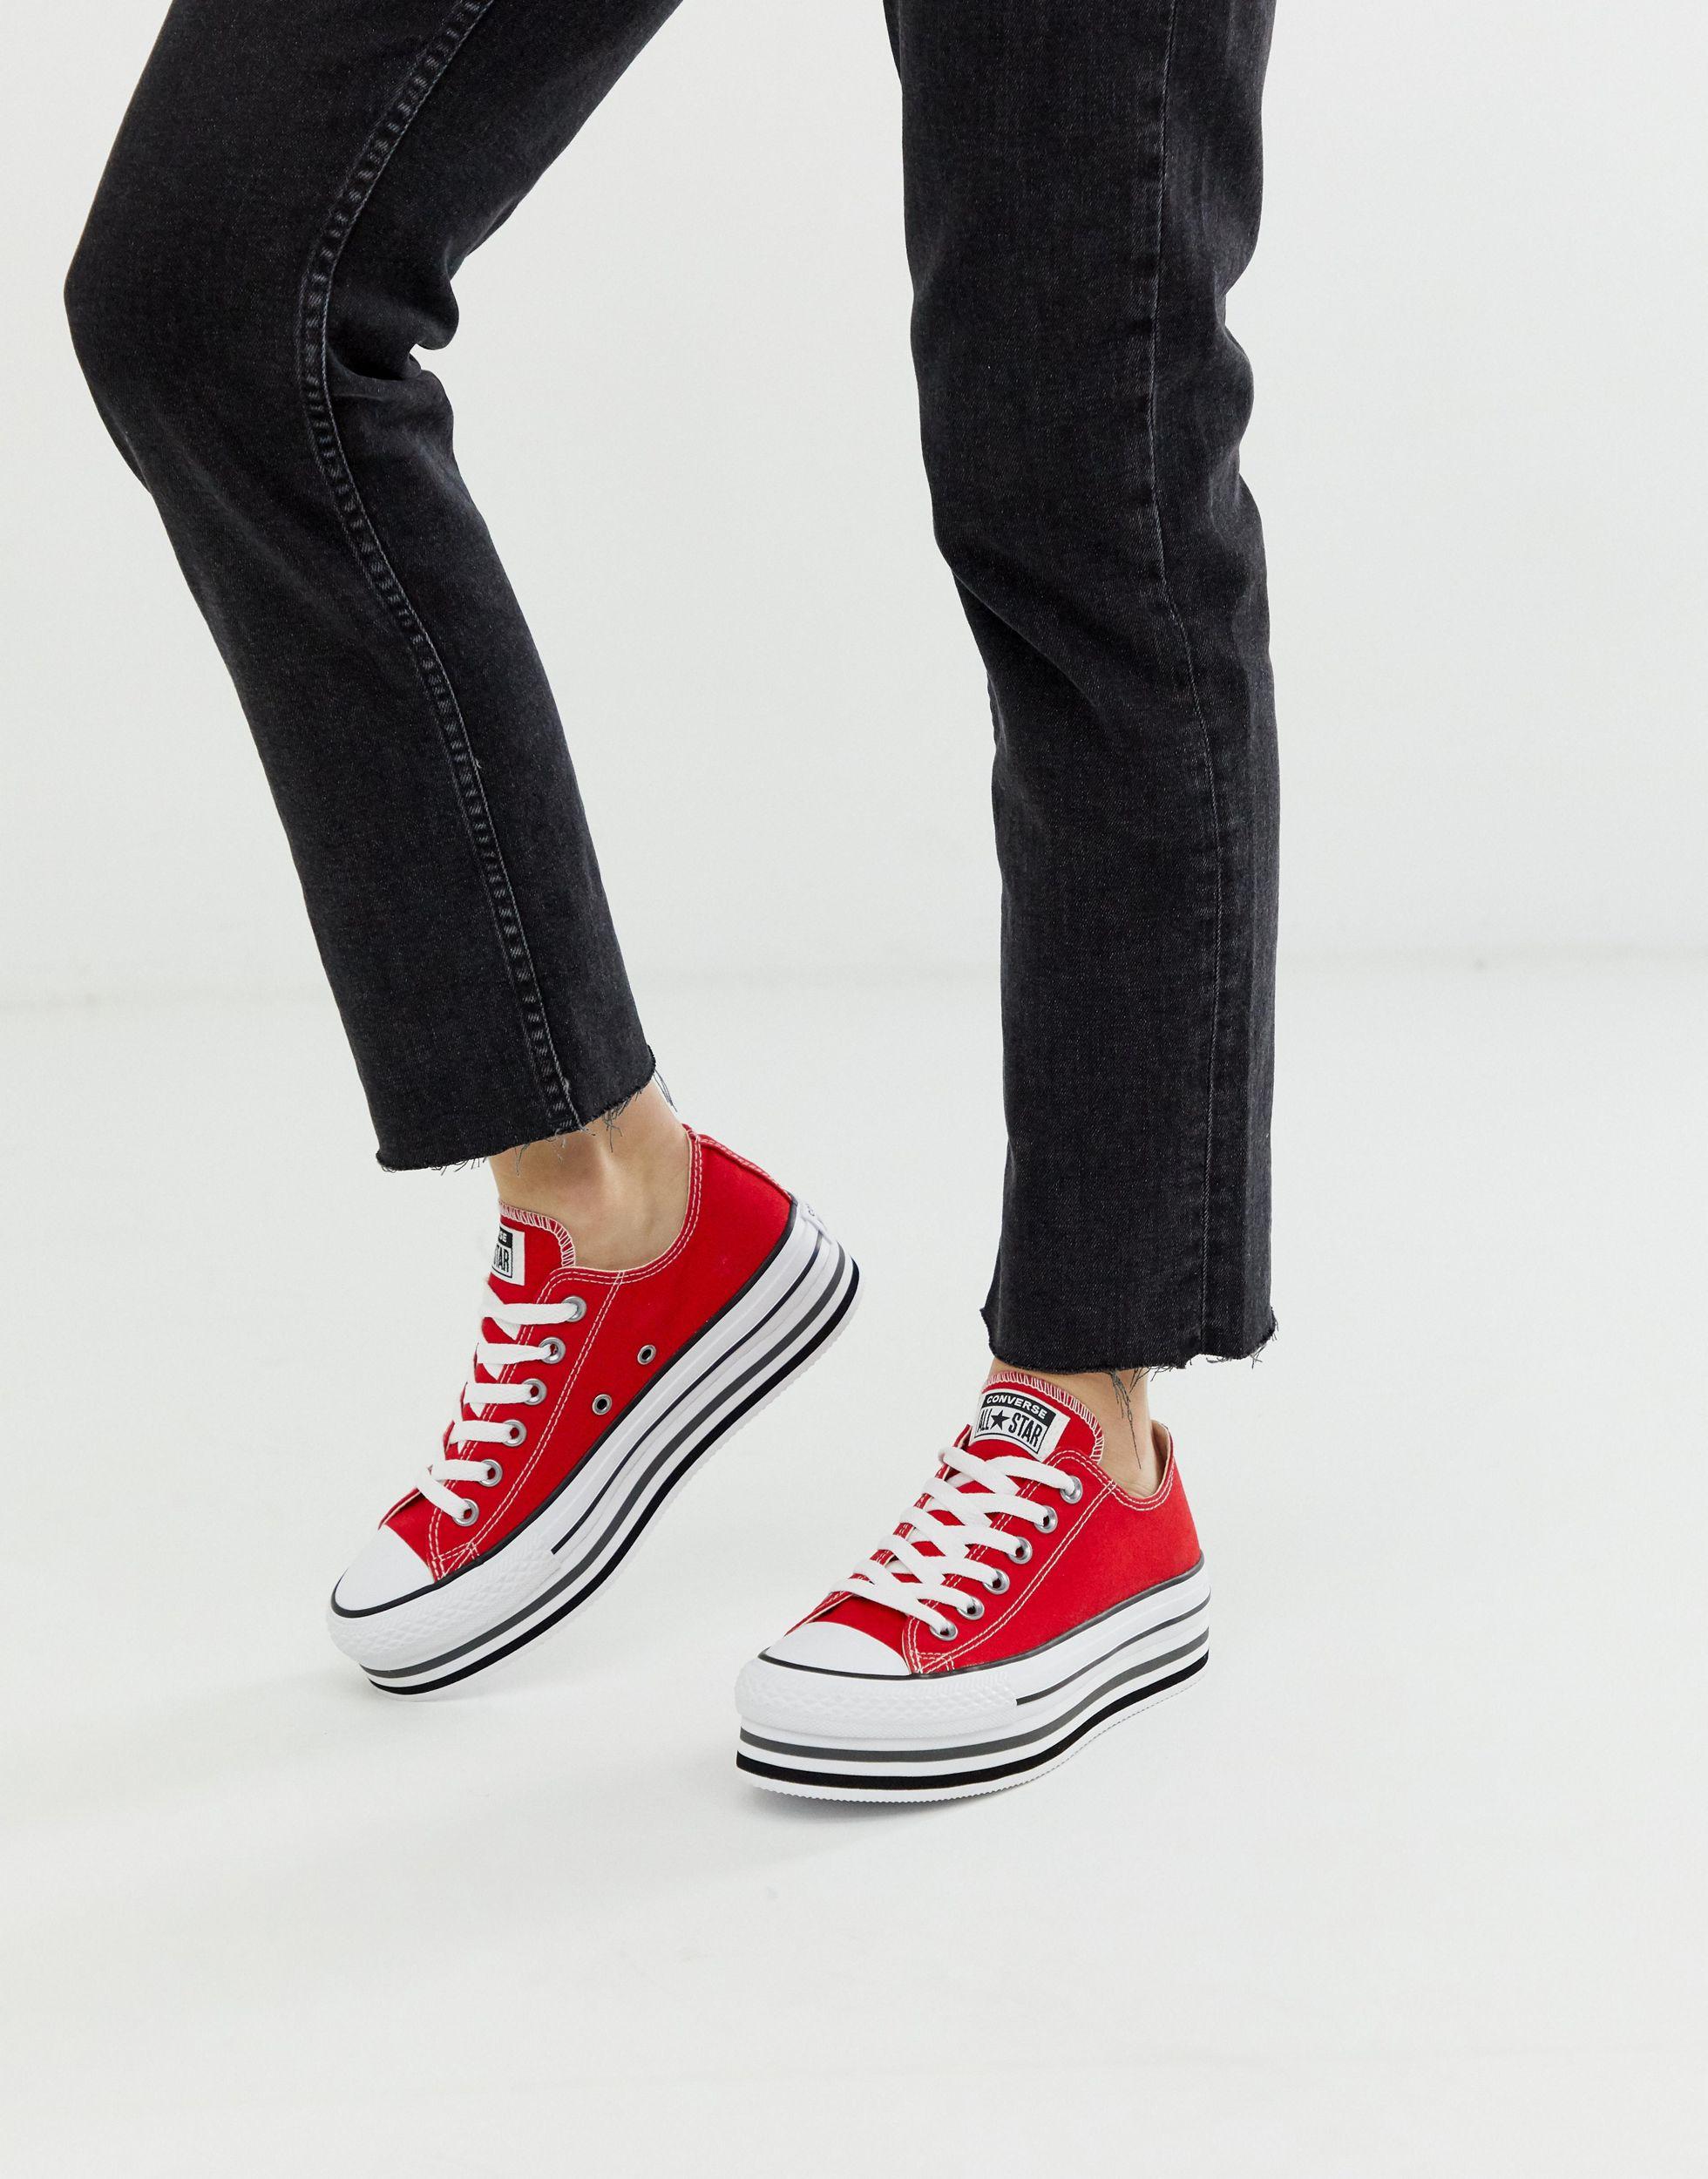 Converse Chuck Taylor All Star Platform Layer Red Trainers | Lyst Australia